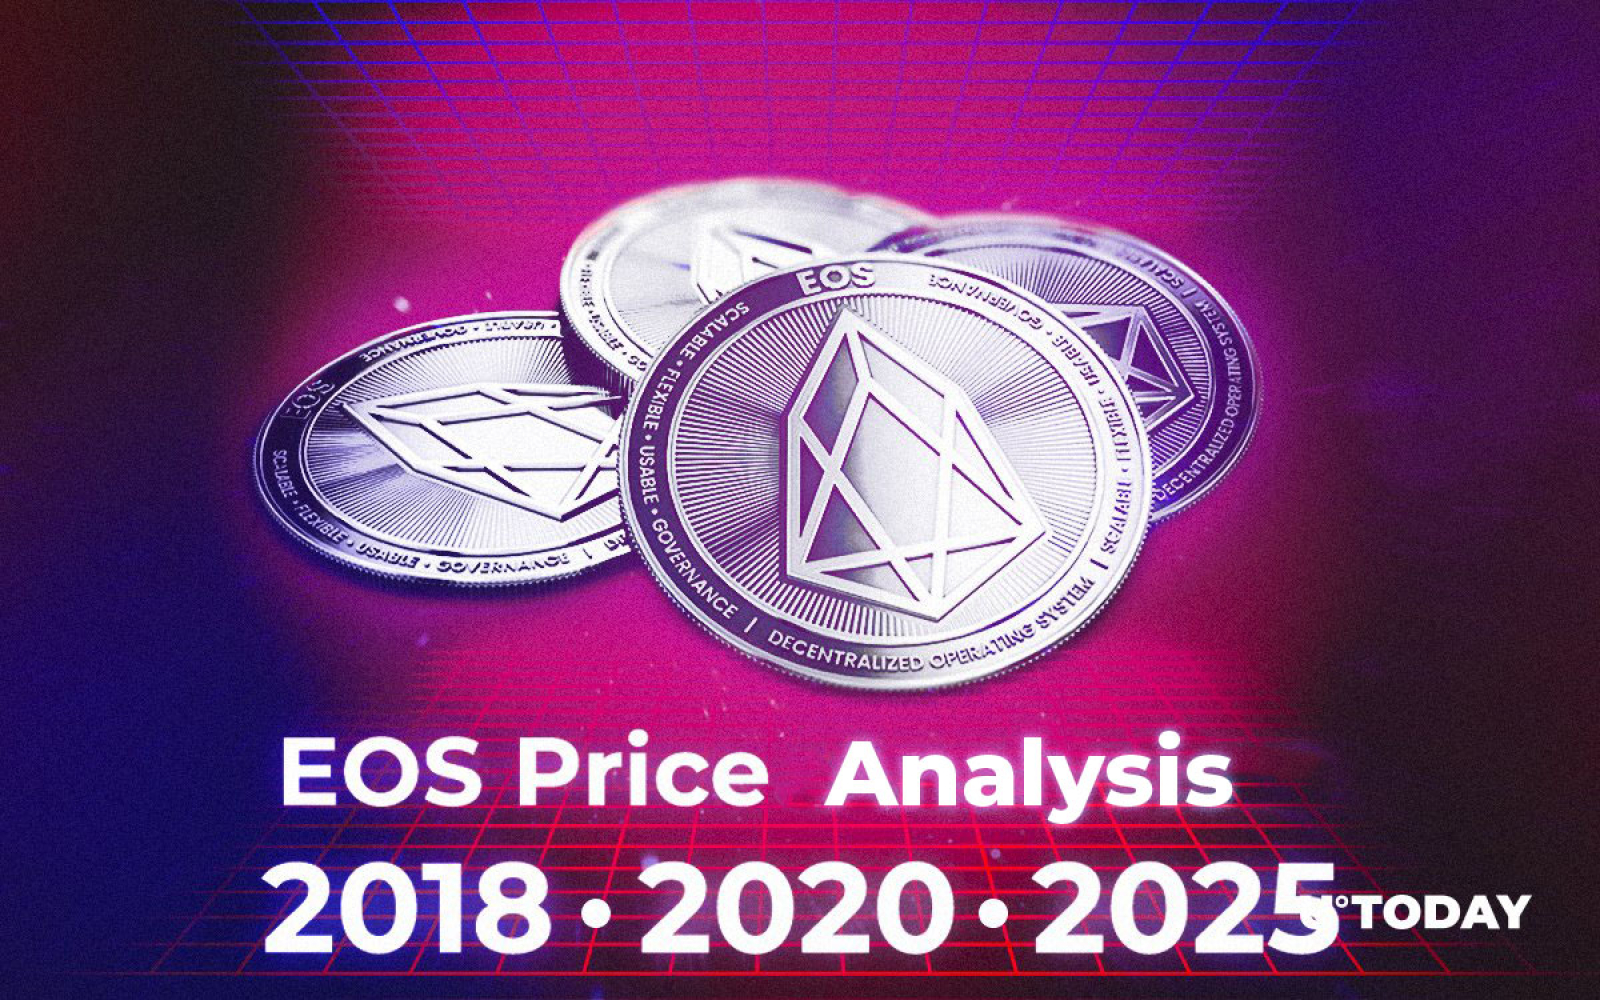 Eos crypto price 2018 when will metamask transactions be dropped